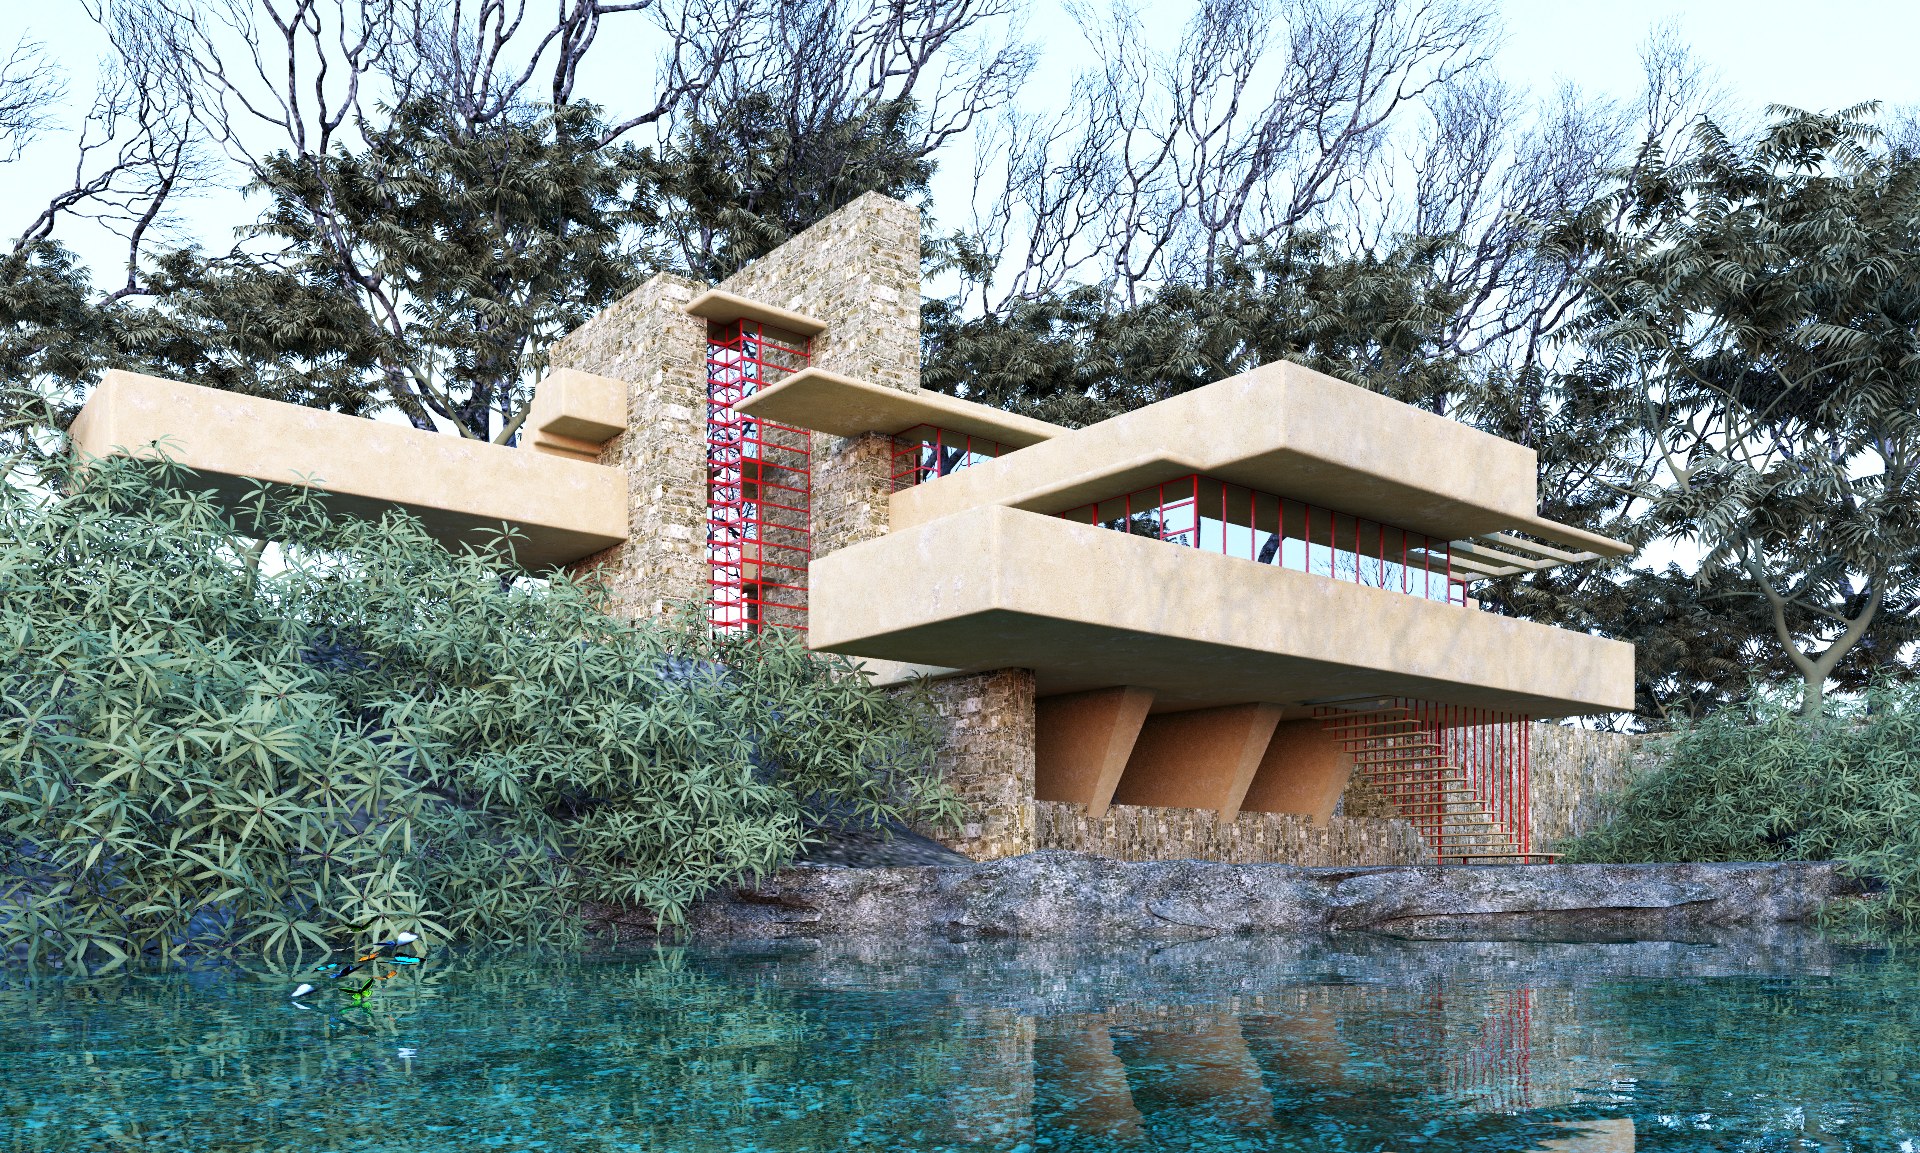 Fallingwater house vray render by Candra Risanto